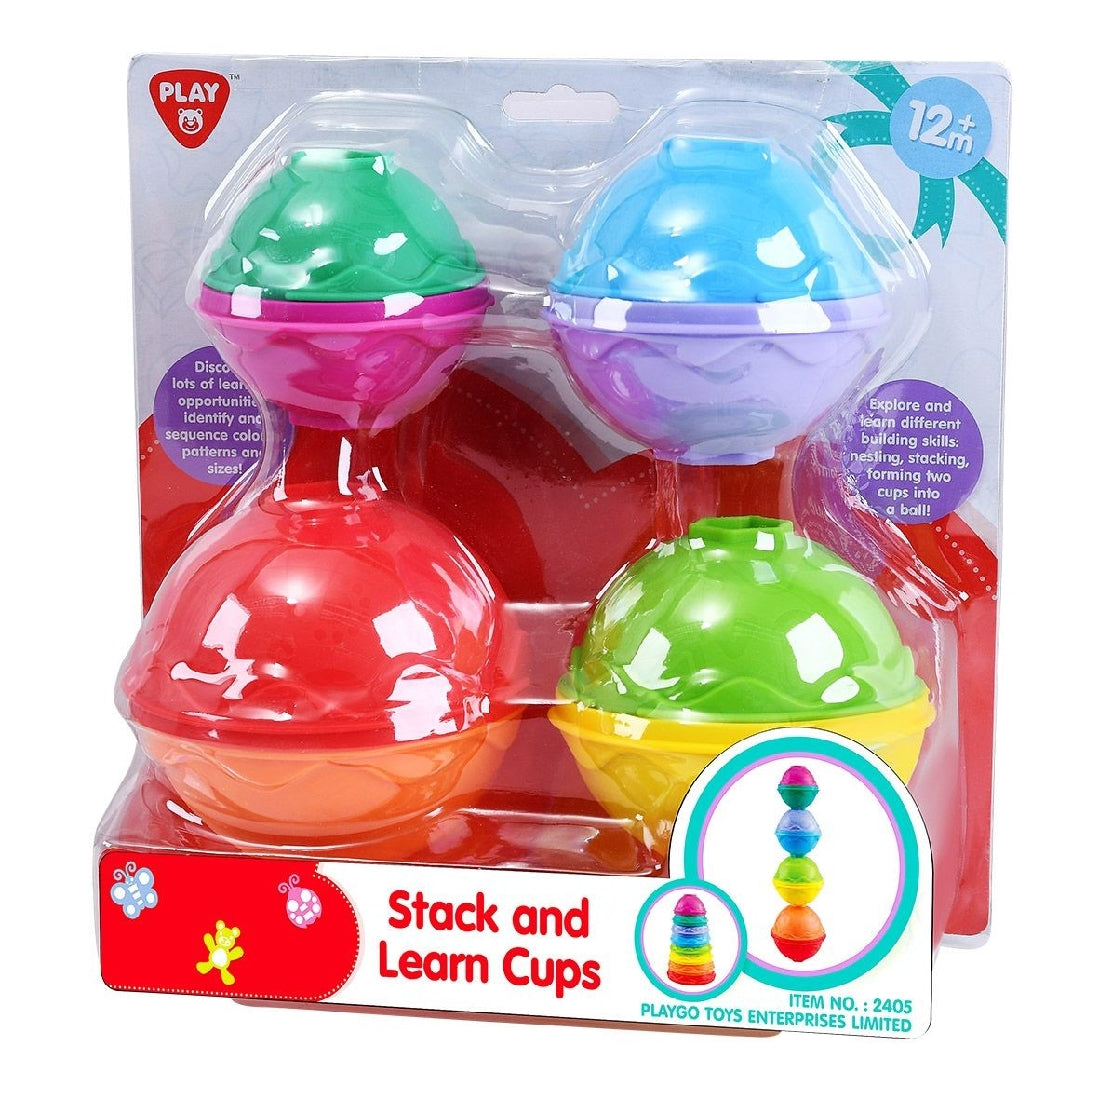 PLAYGO TOYS ENT. LTD. STACK & LEARN CUPS